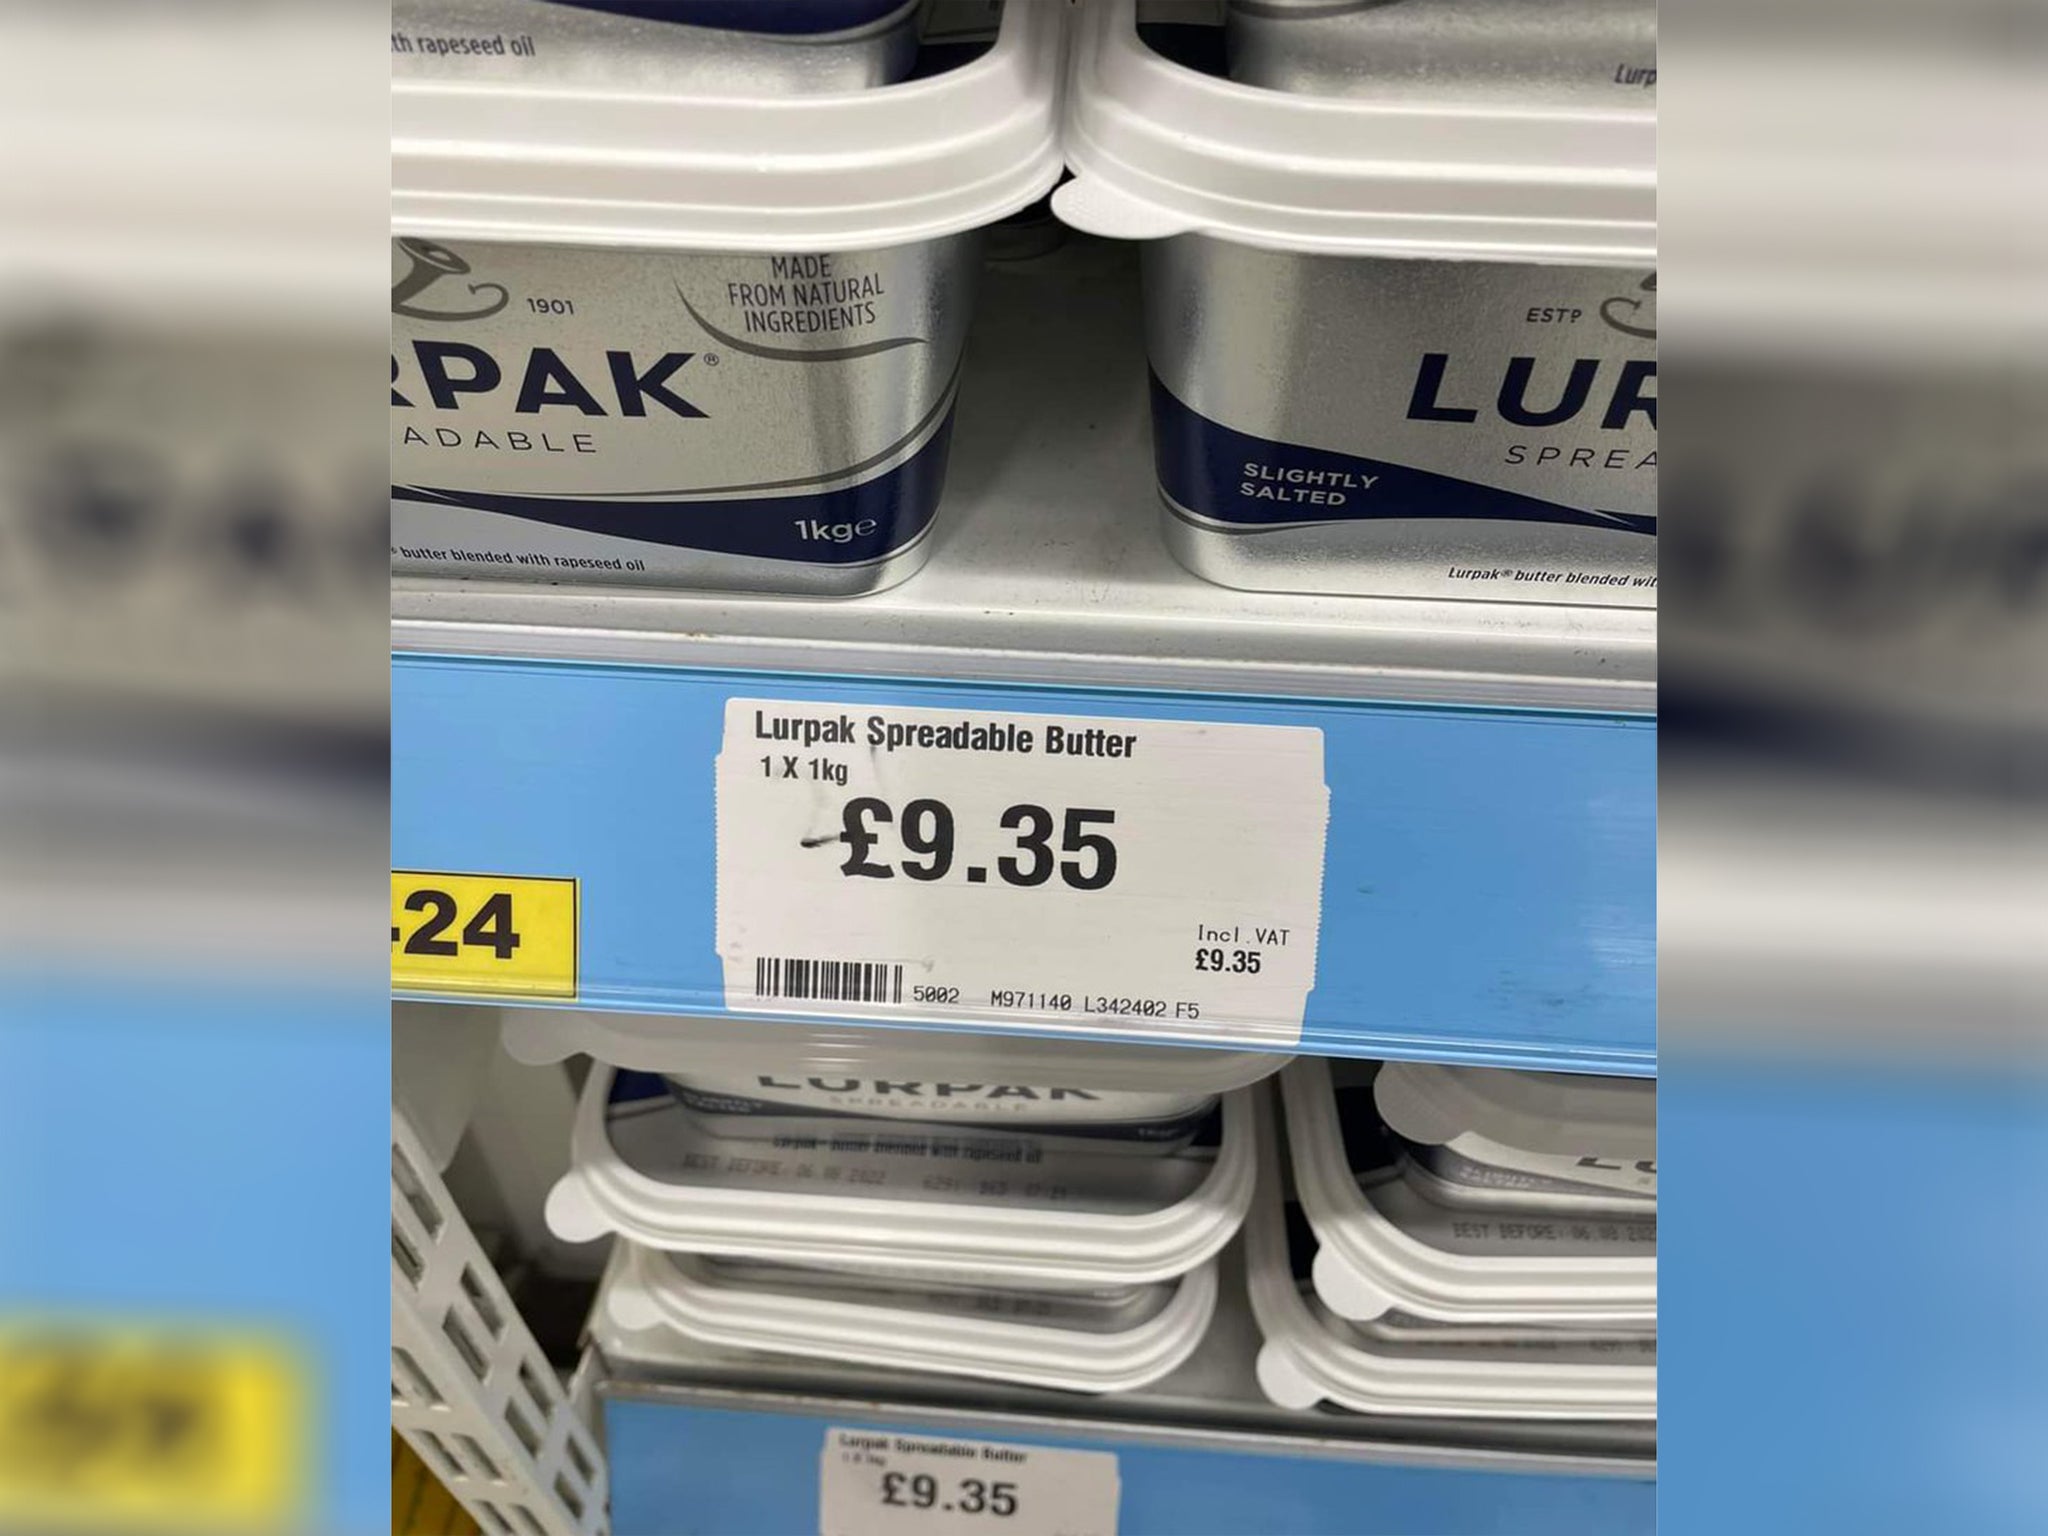 Lurpak prices have surged at supermarkets amid the cost of living crisis